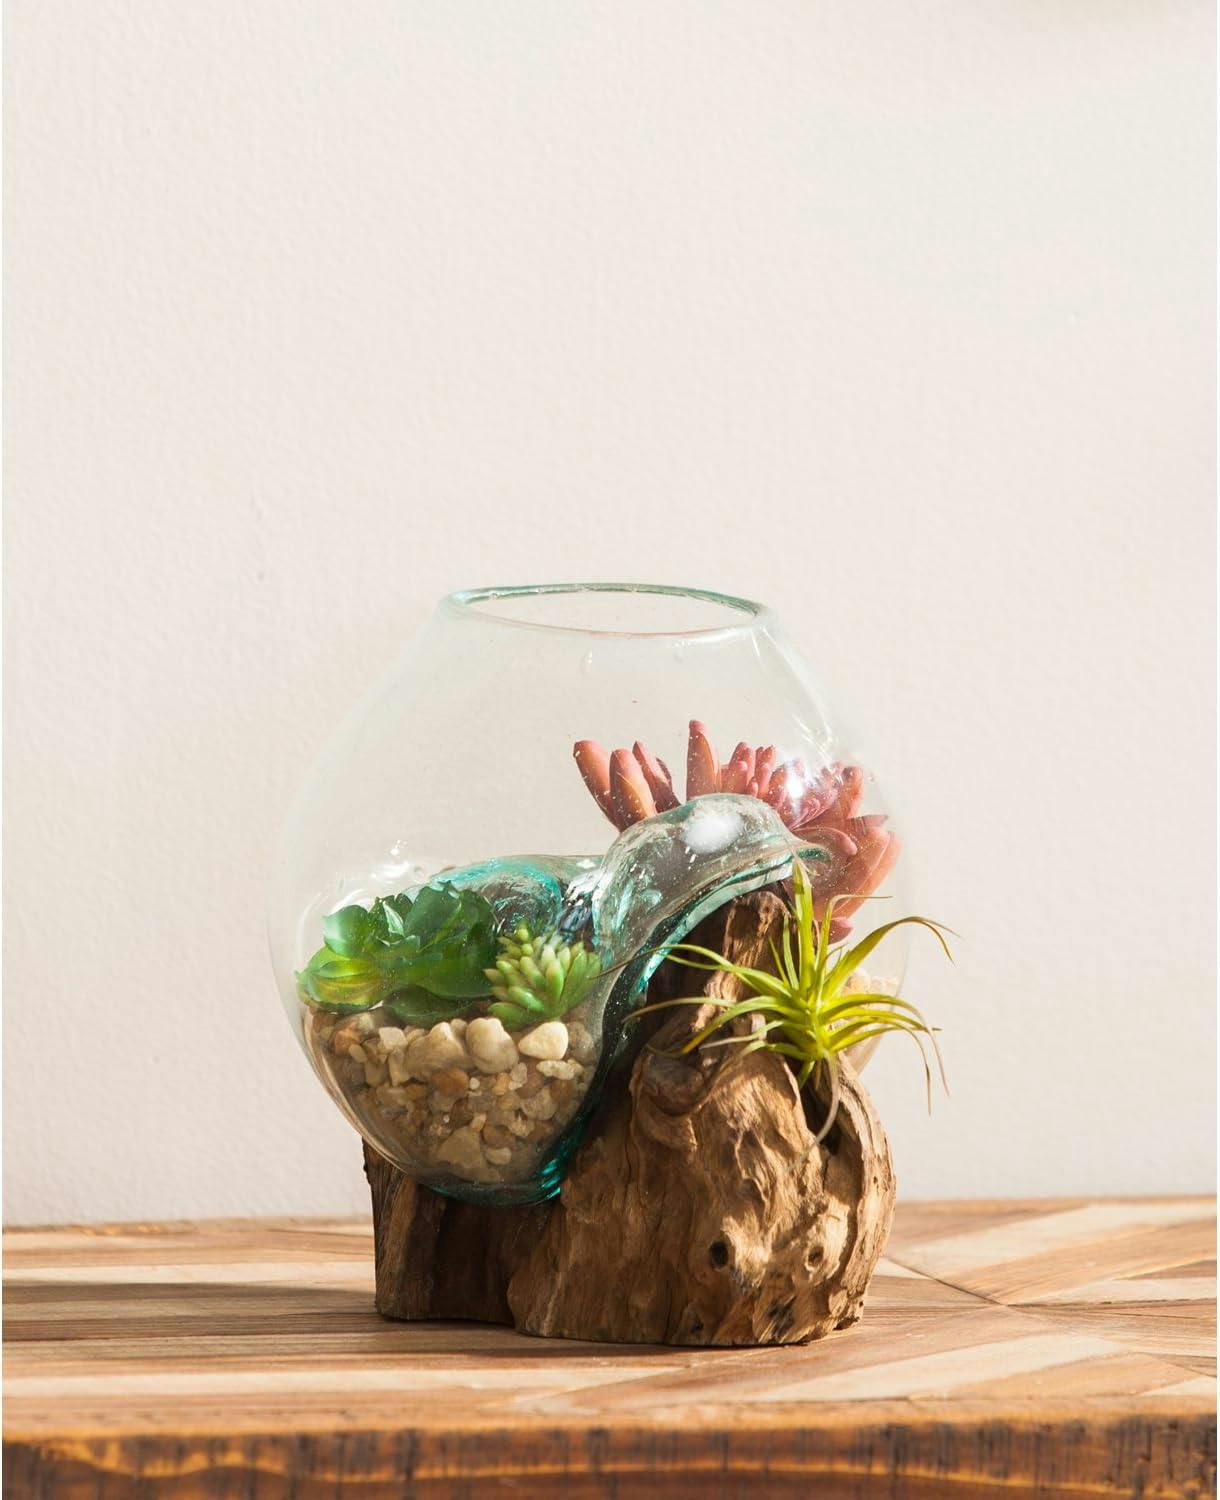 Elegant Driftwood & Glass Planter for Outdoor and Indoor Decor